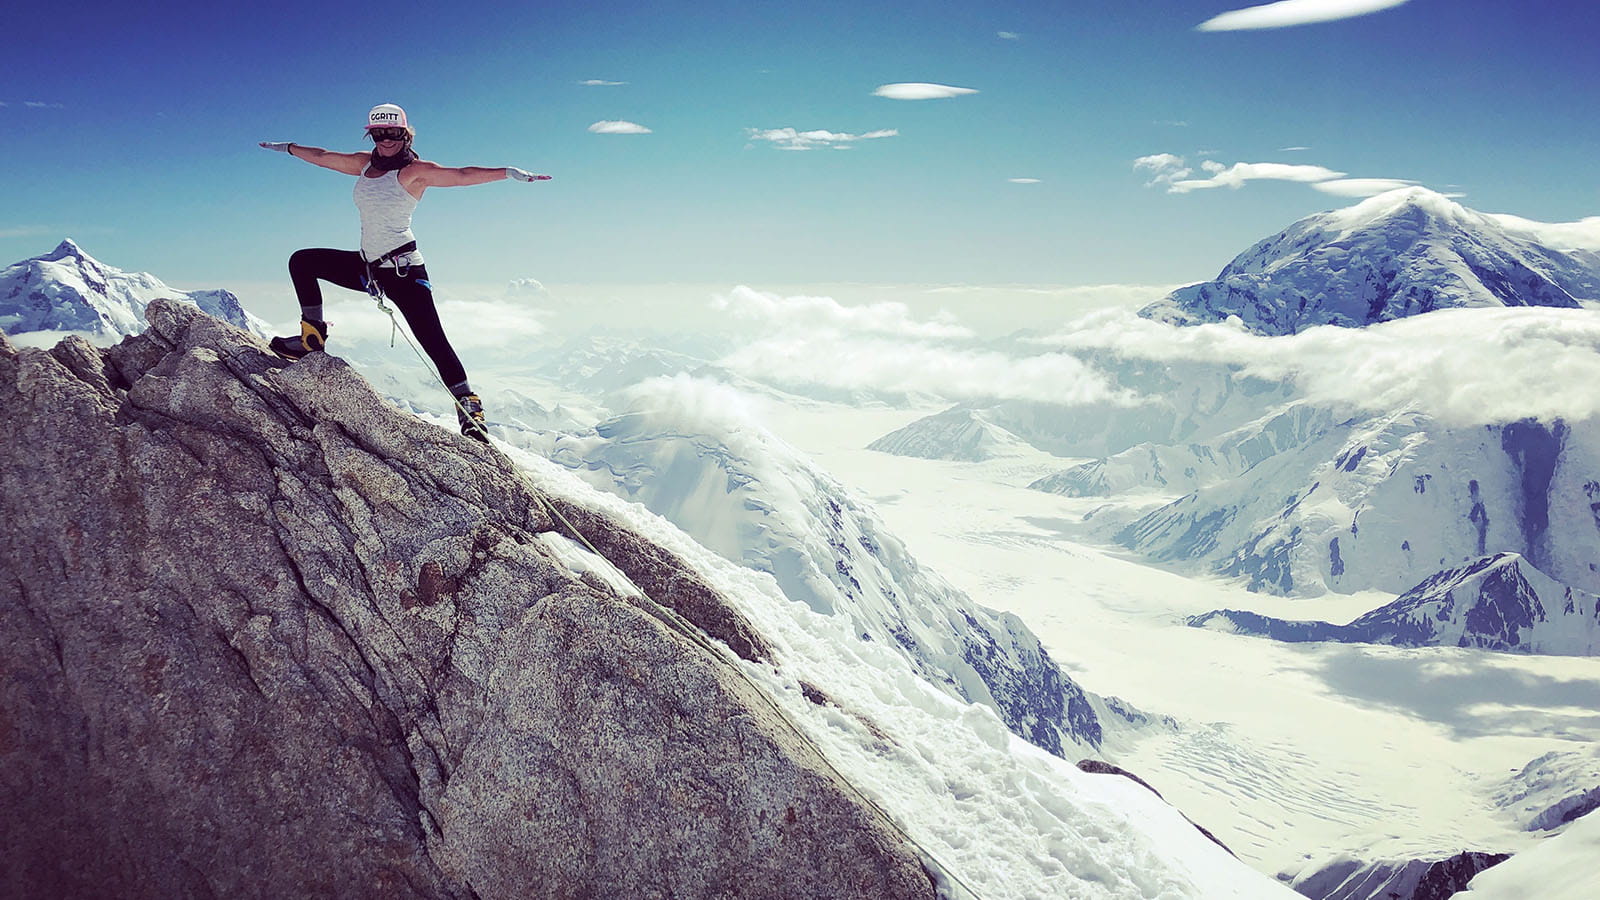 Buchanan strikes a yoga pose near Denali's 14,000-foot camp in Alaska in June 2019. The spot is appropriately called the “End of the World,” because it drops off thousands of feet below.